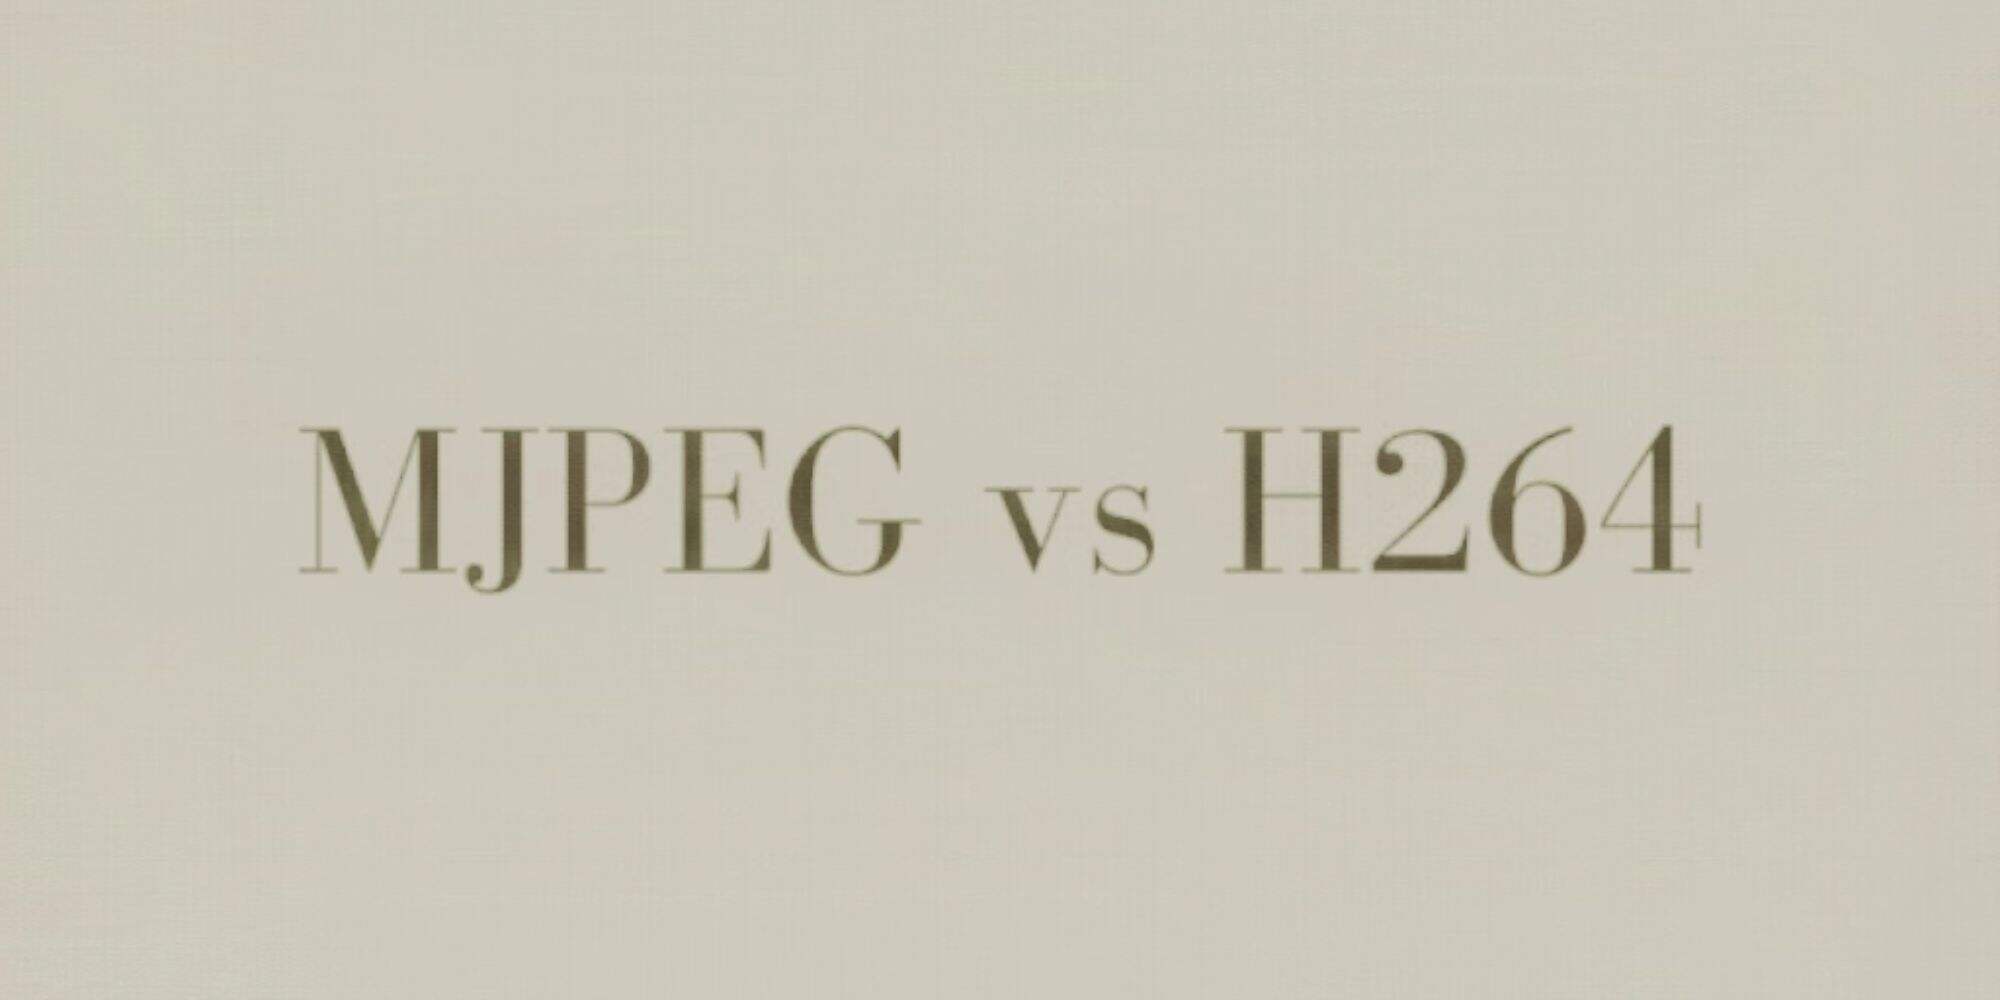 Motion JPEG vs H.264: Understanding the Difference in Video Compression Codecs